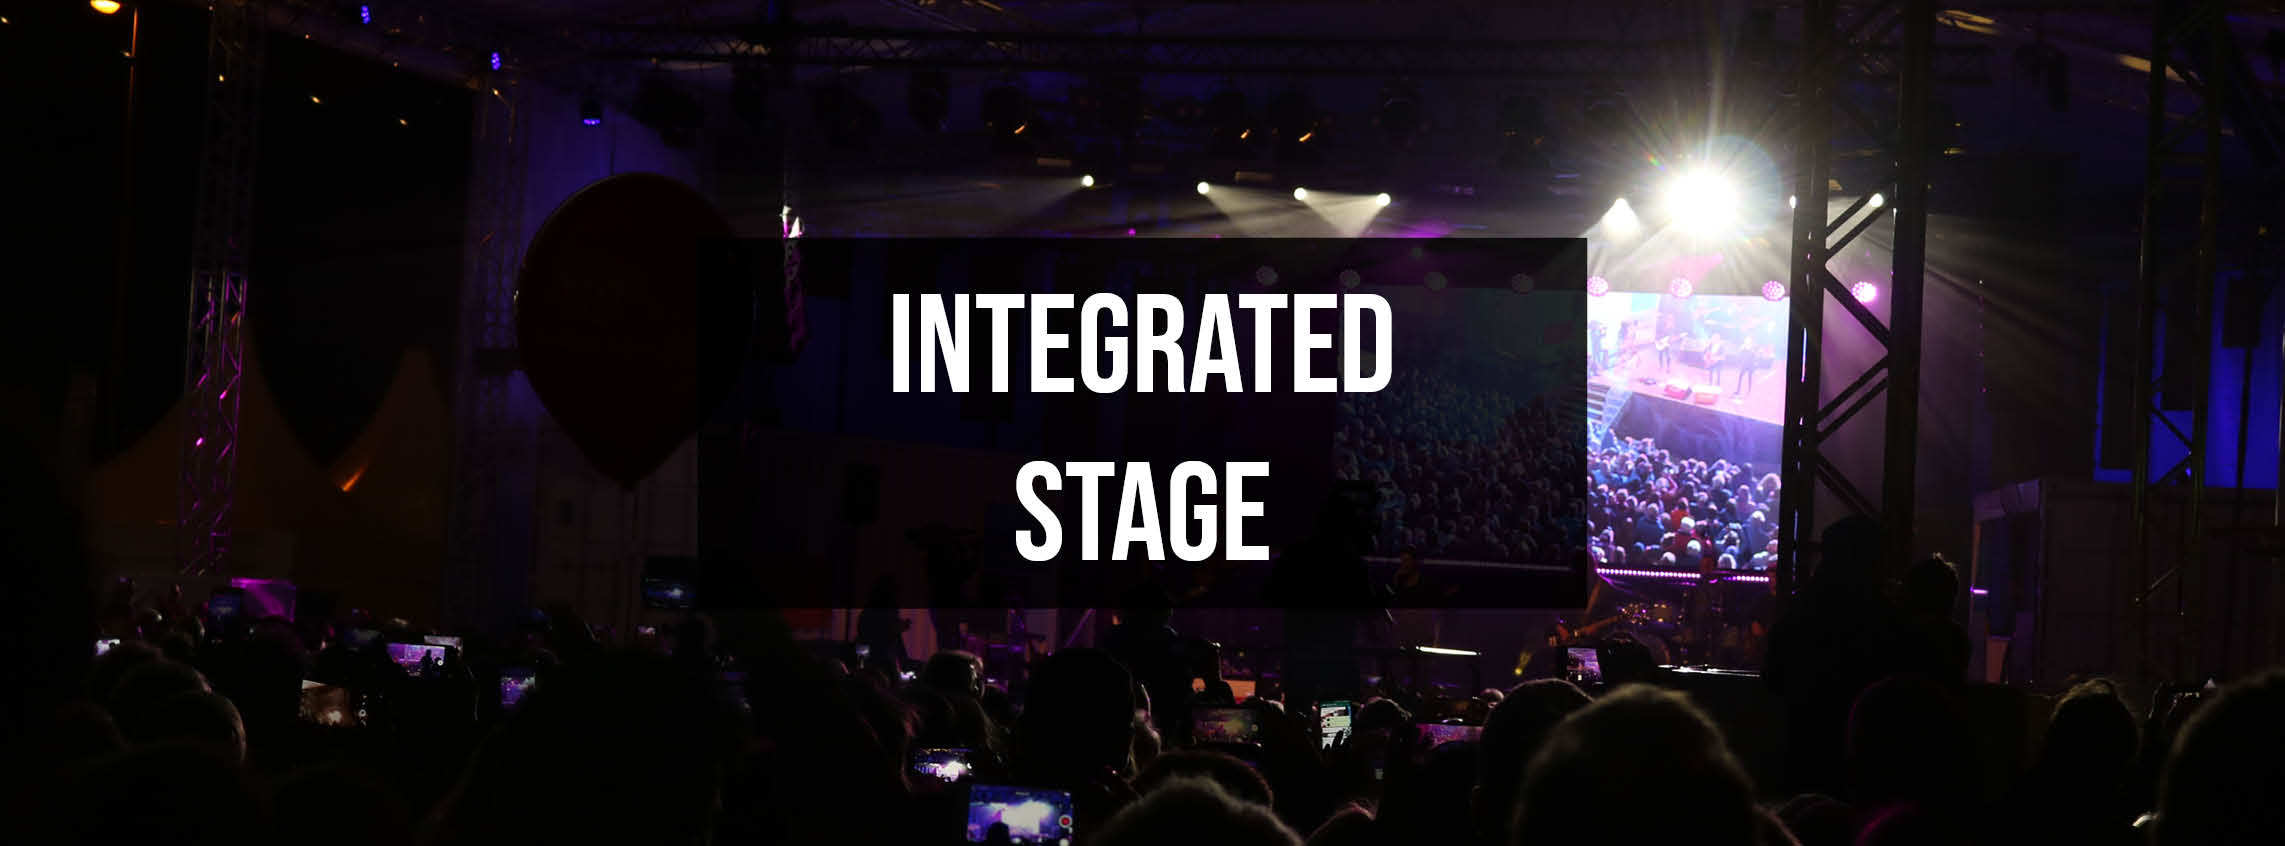 Integrated stage